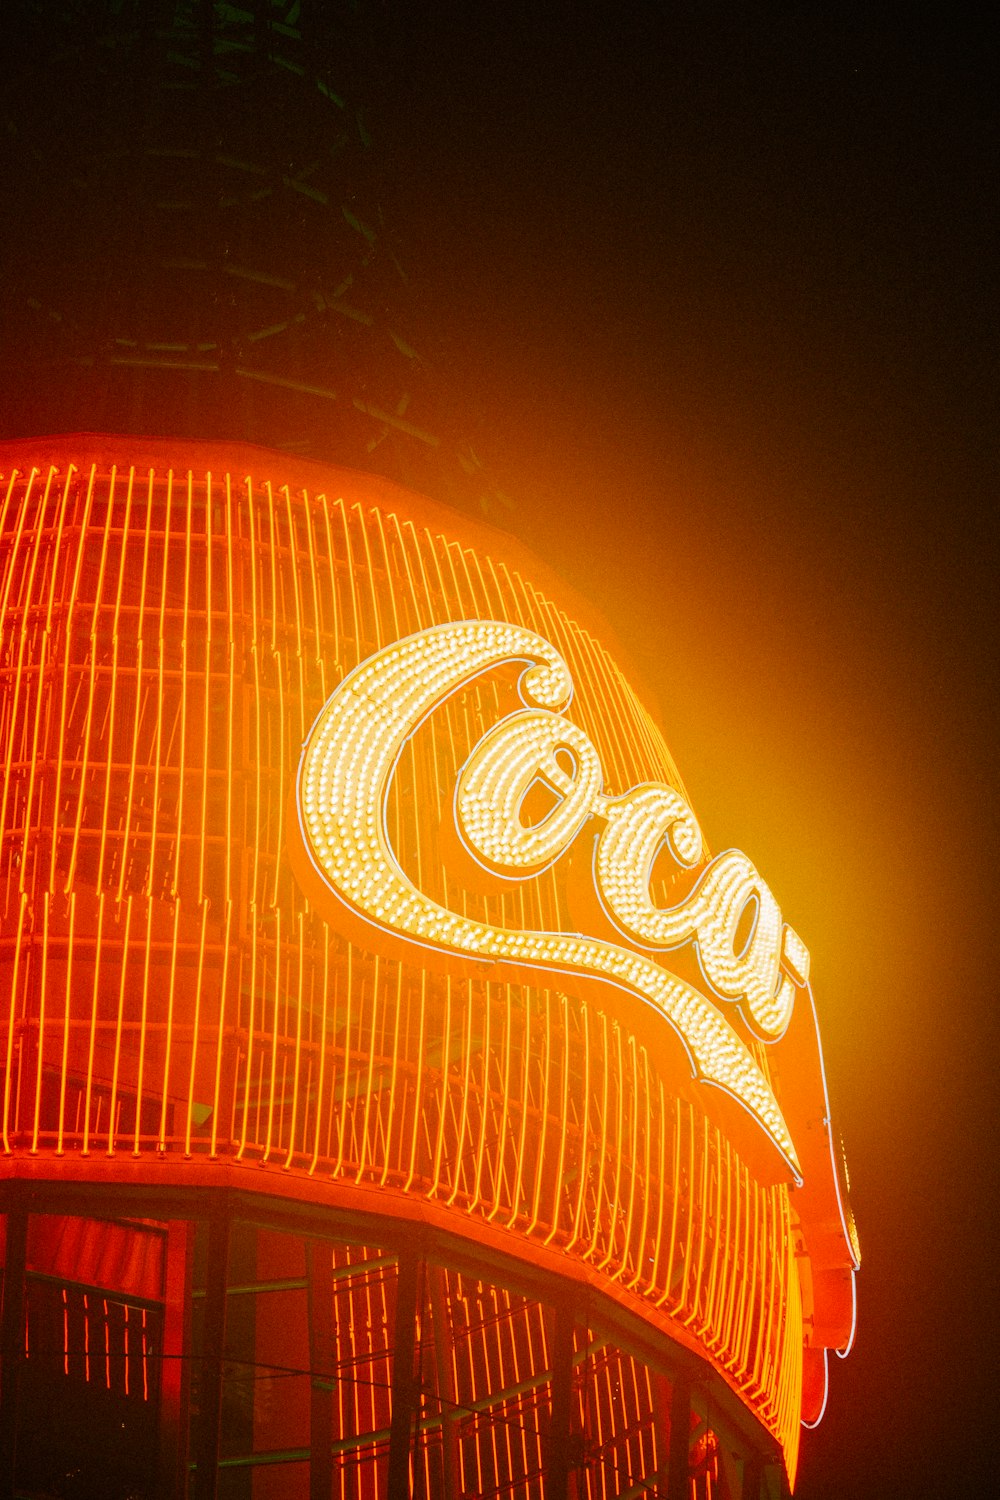 a coca cola sign lit up at night